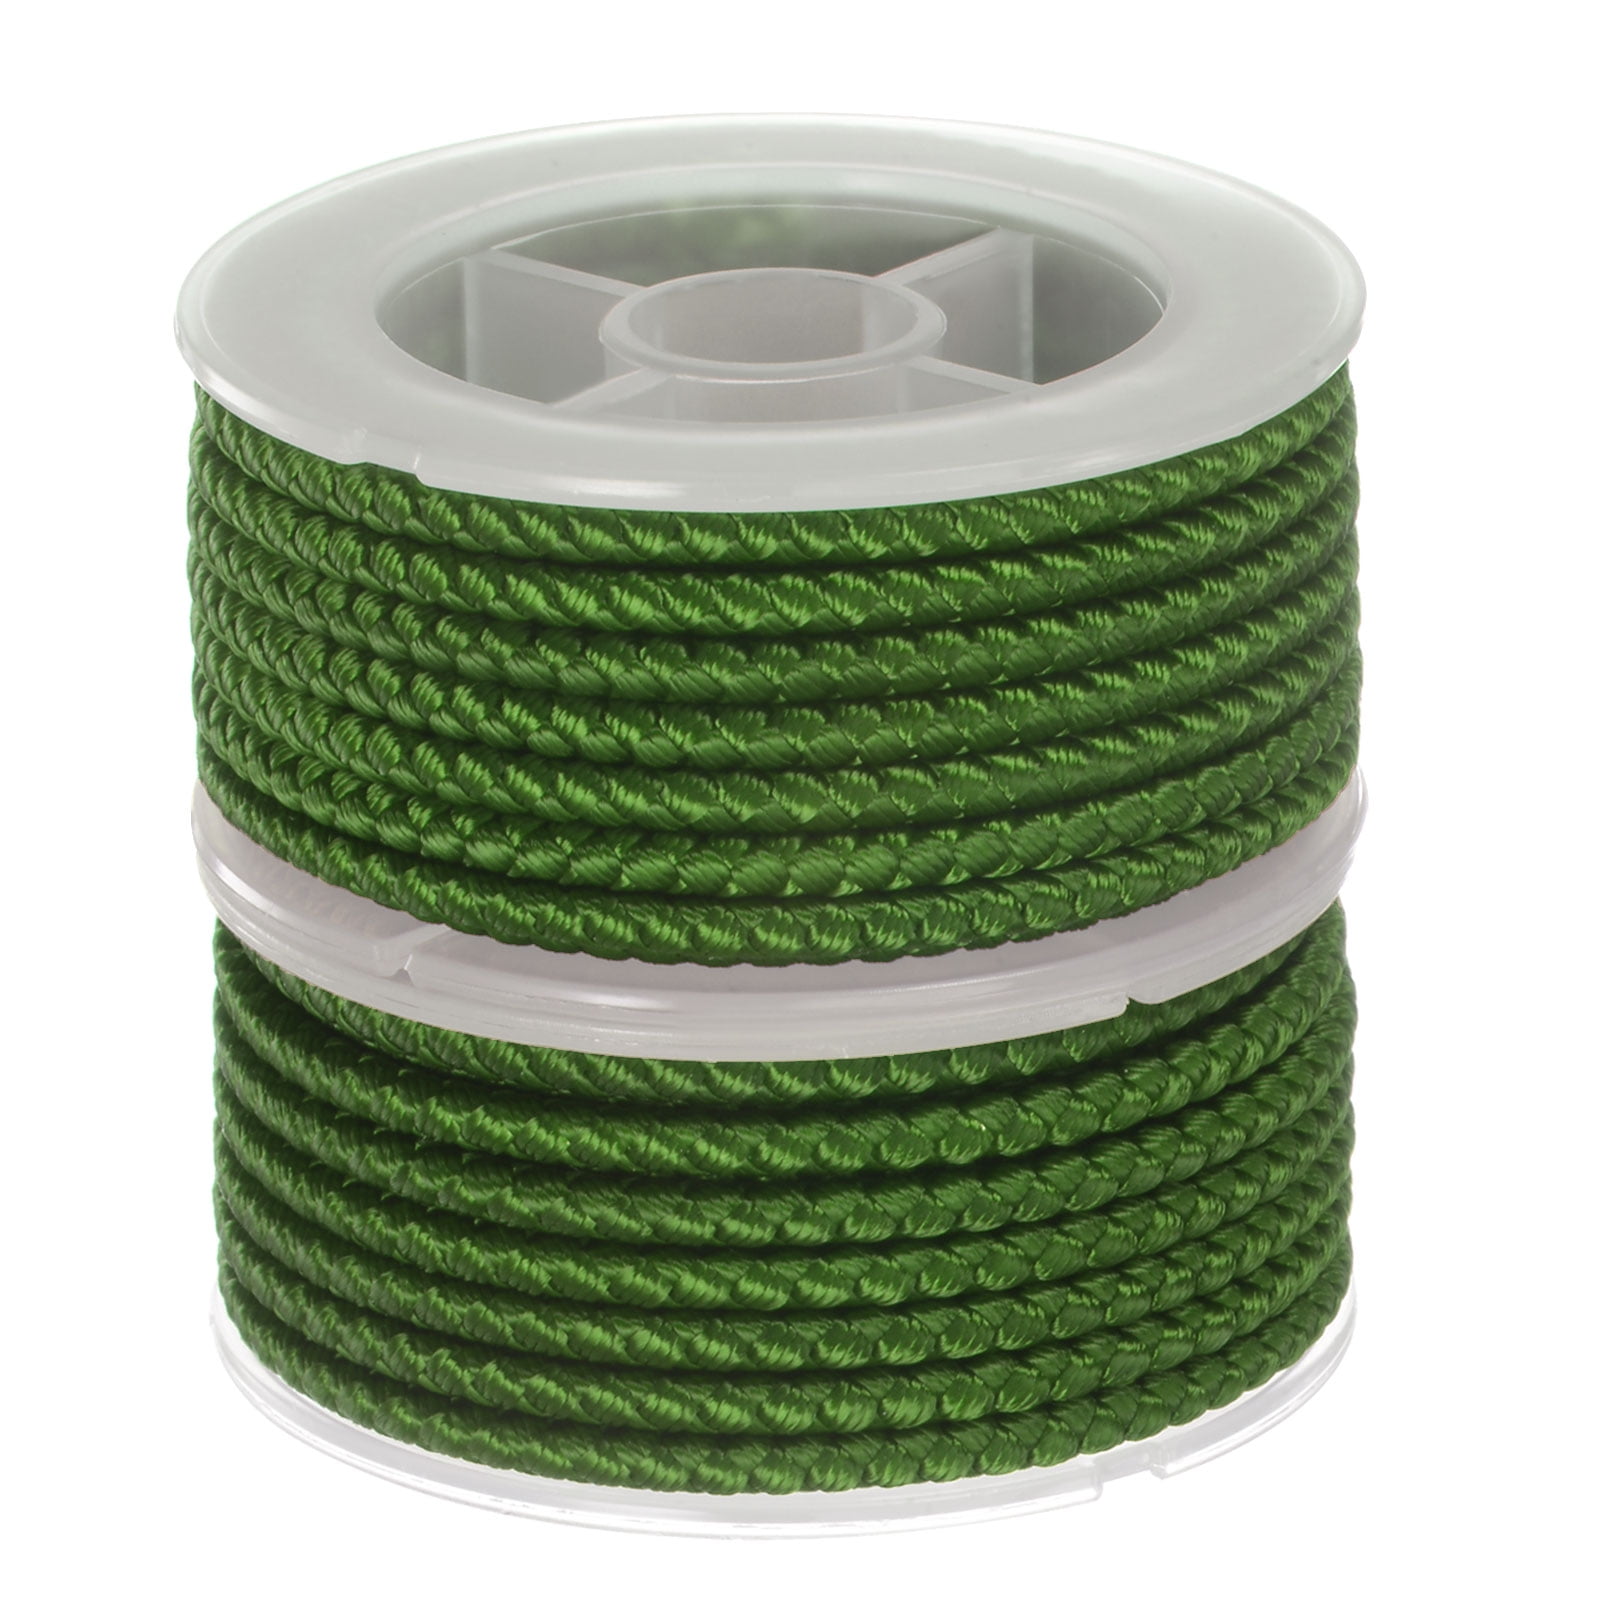 2 Packs Nylon Thread Twine Beading Cord 4mm Extra-Strong Braided